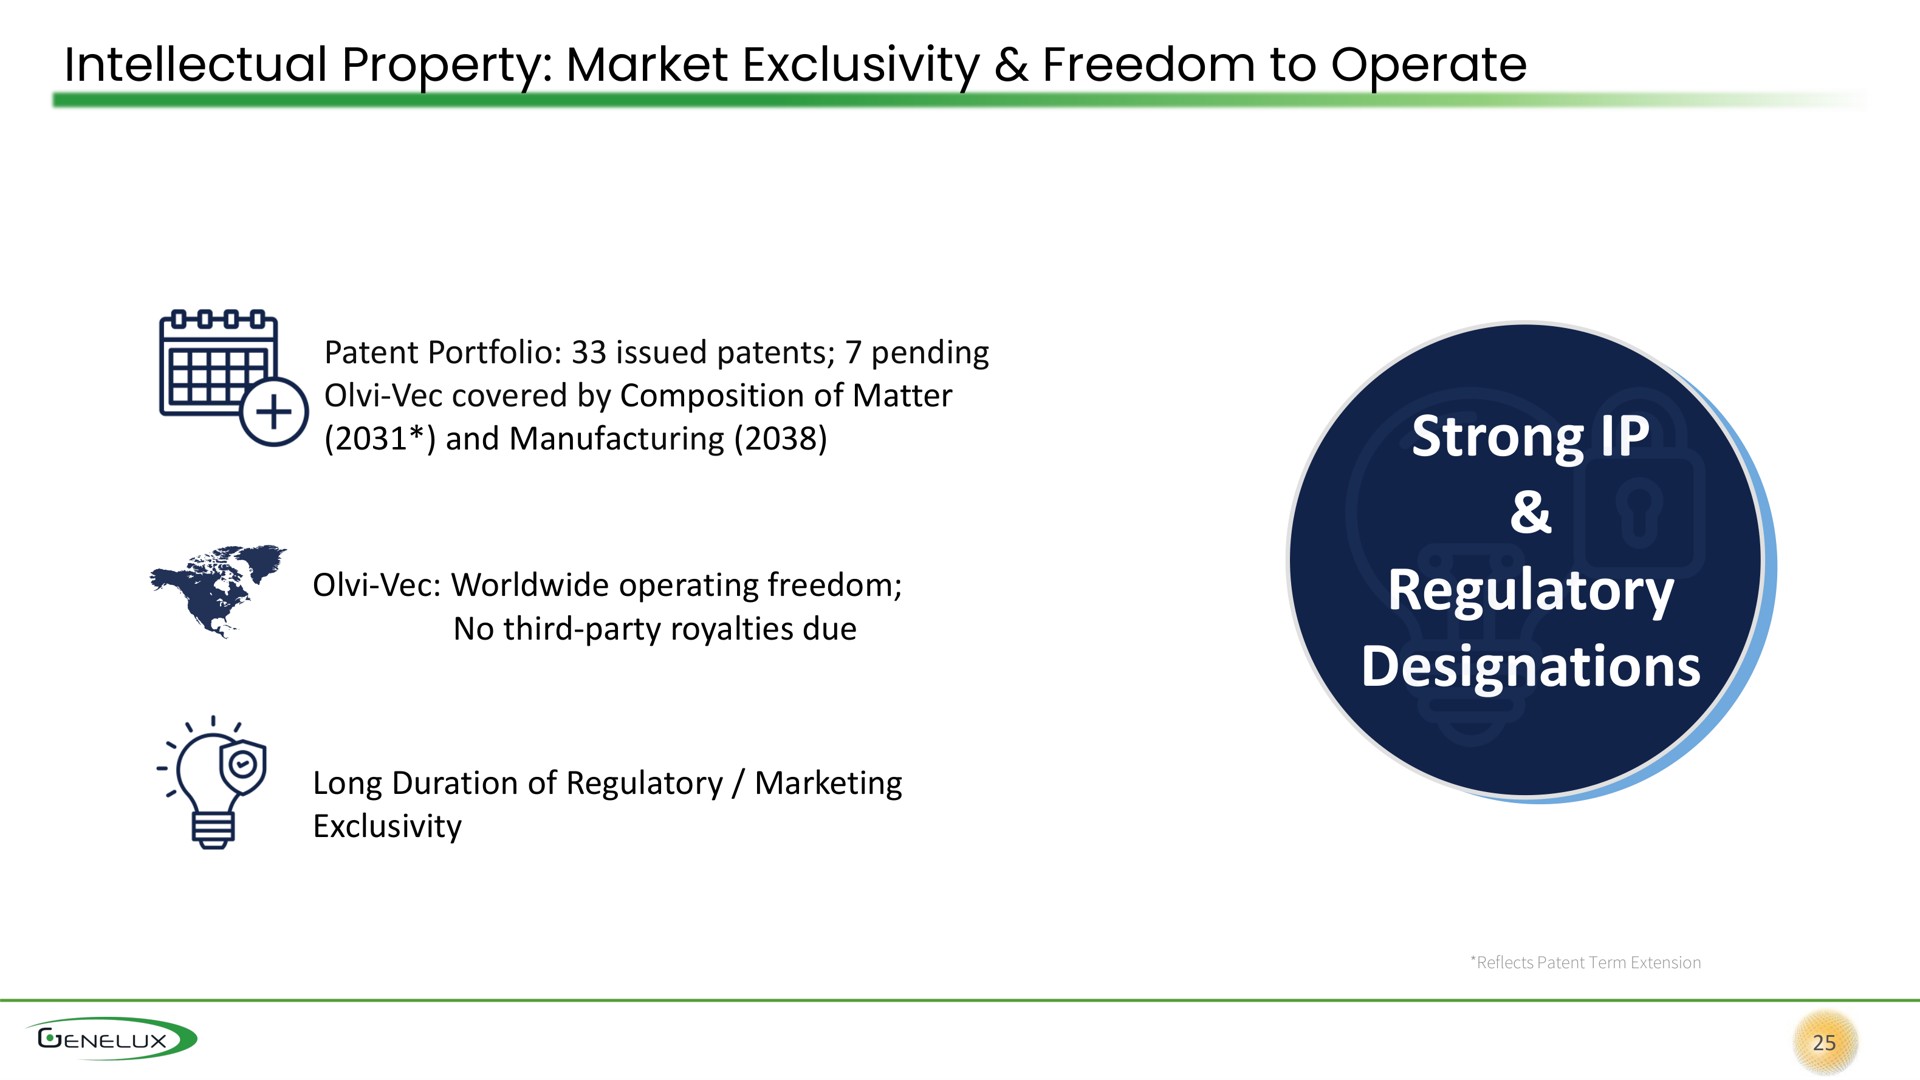 intellectual property market exclusivity freedom to operate strong regulatory designations | Genelux